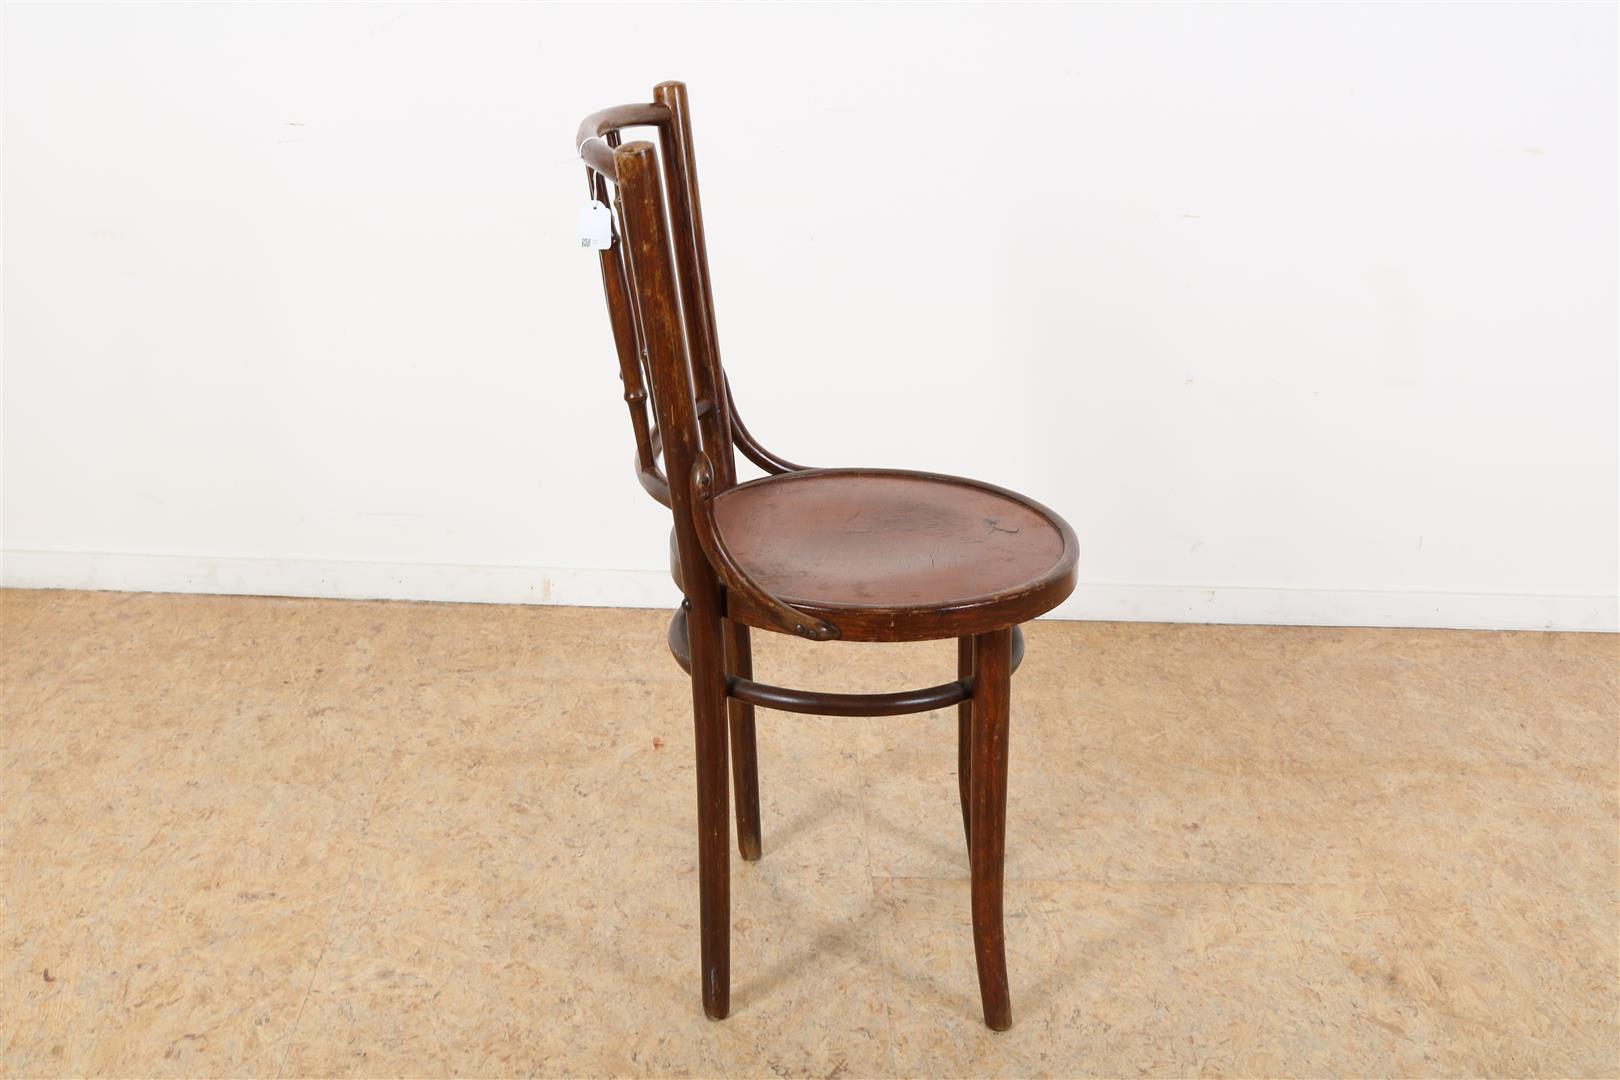 Beech wood Thonet-style chair, with illegible stamp on the bottom, possibly Austria, approx 1920. - Image 2 of 3